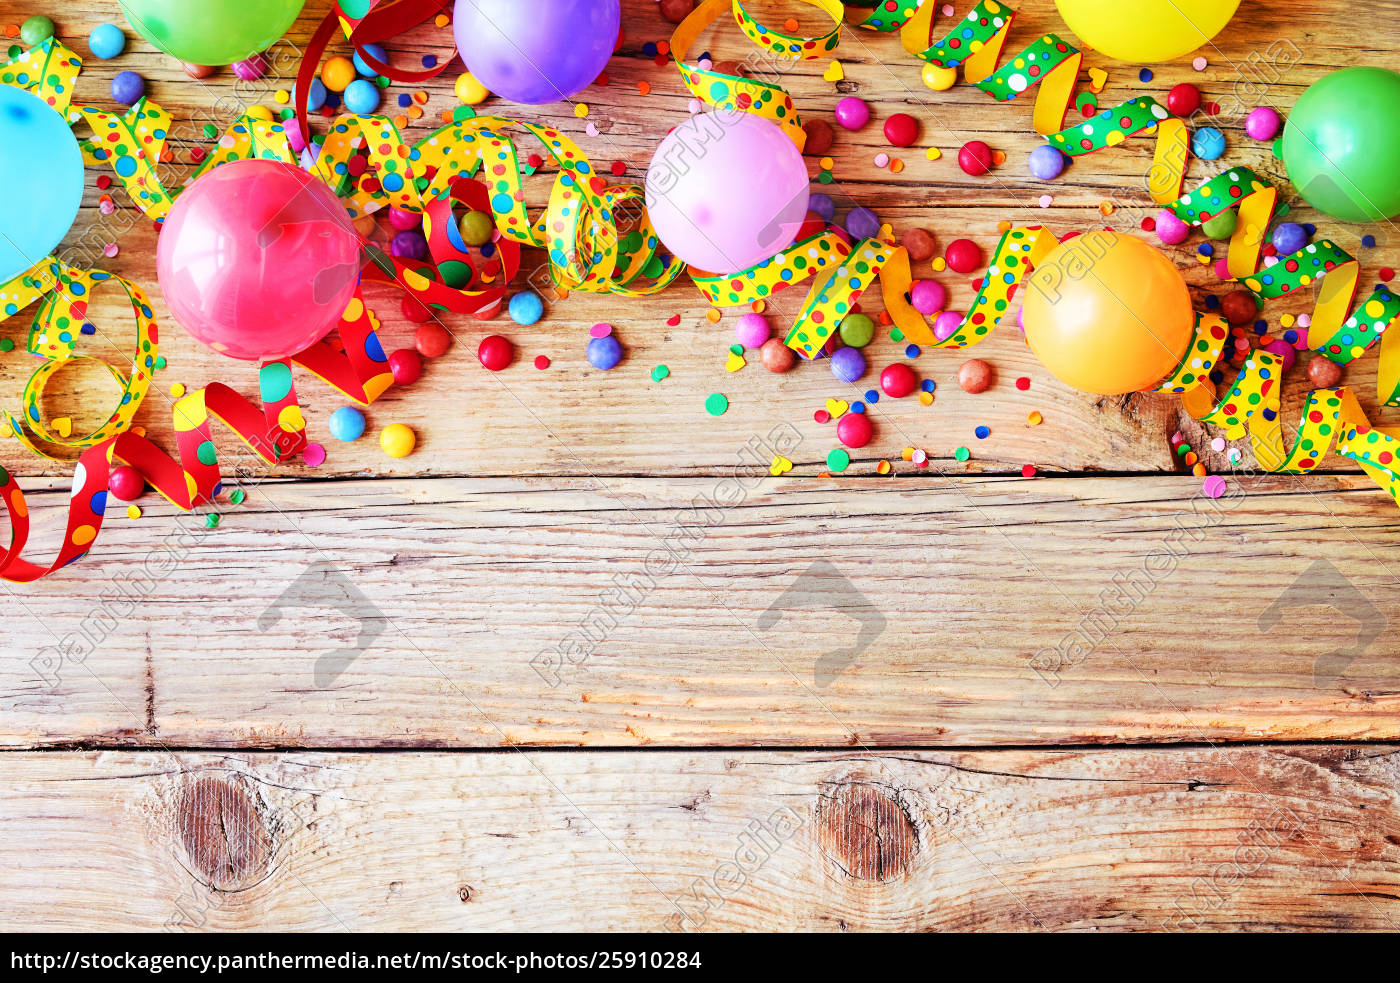 Carnival Or Birthday Background And Party Balloons Royalty Free Photo 25910284 Panthermedia Stock Agency